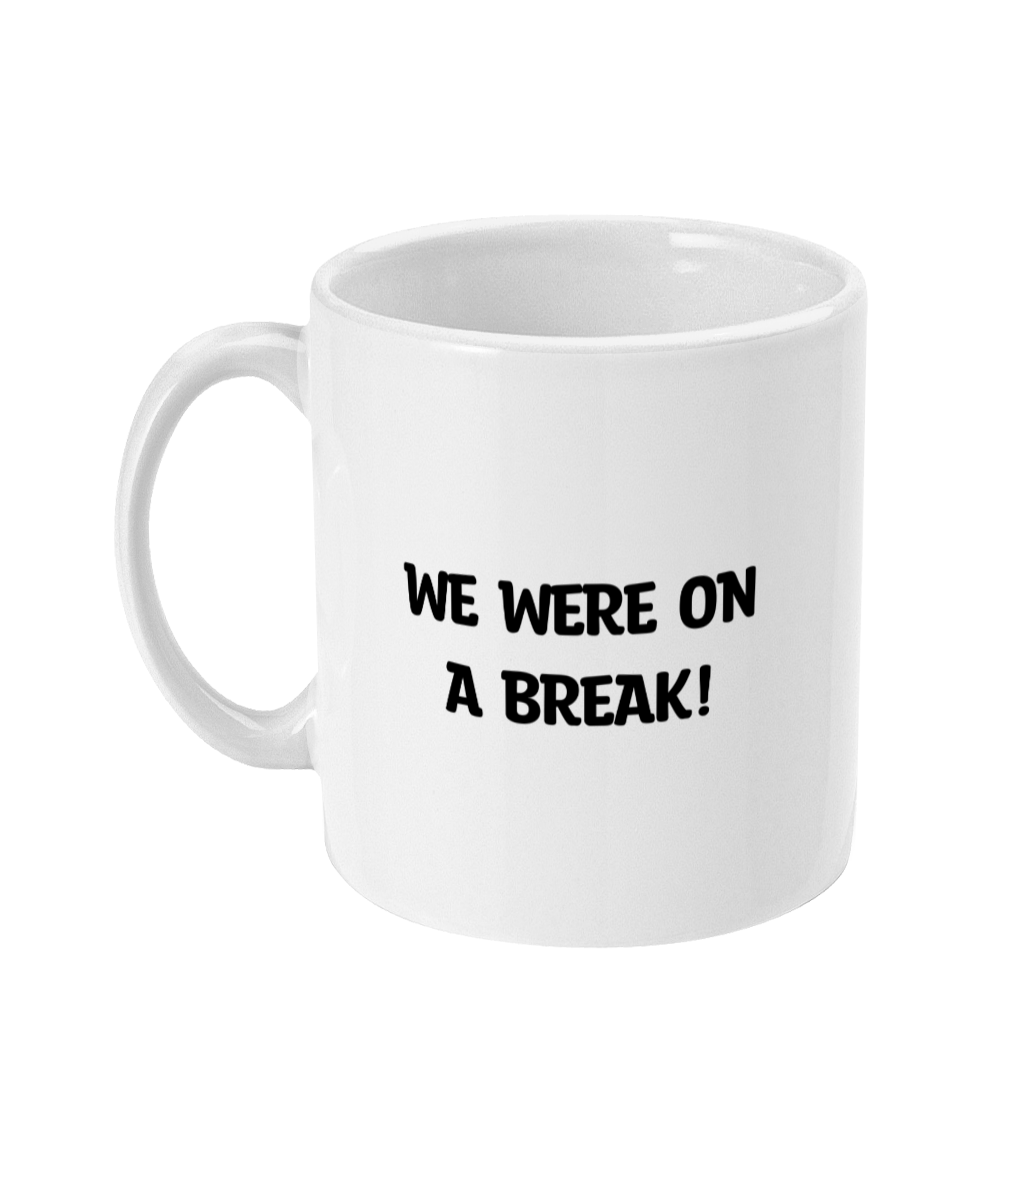 A glossy white 11oz mug with the words 'WE WERE ON A BREAK!' printed in it's centre in large block capital black font. The mug is placed in front of a plain white background.